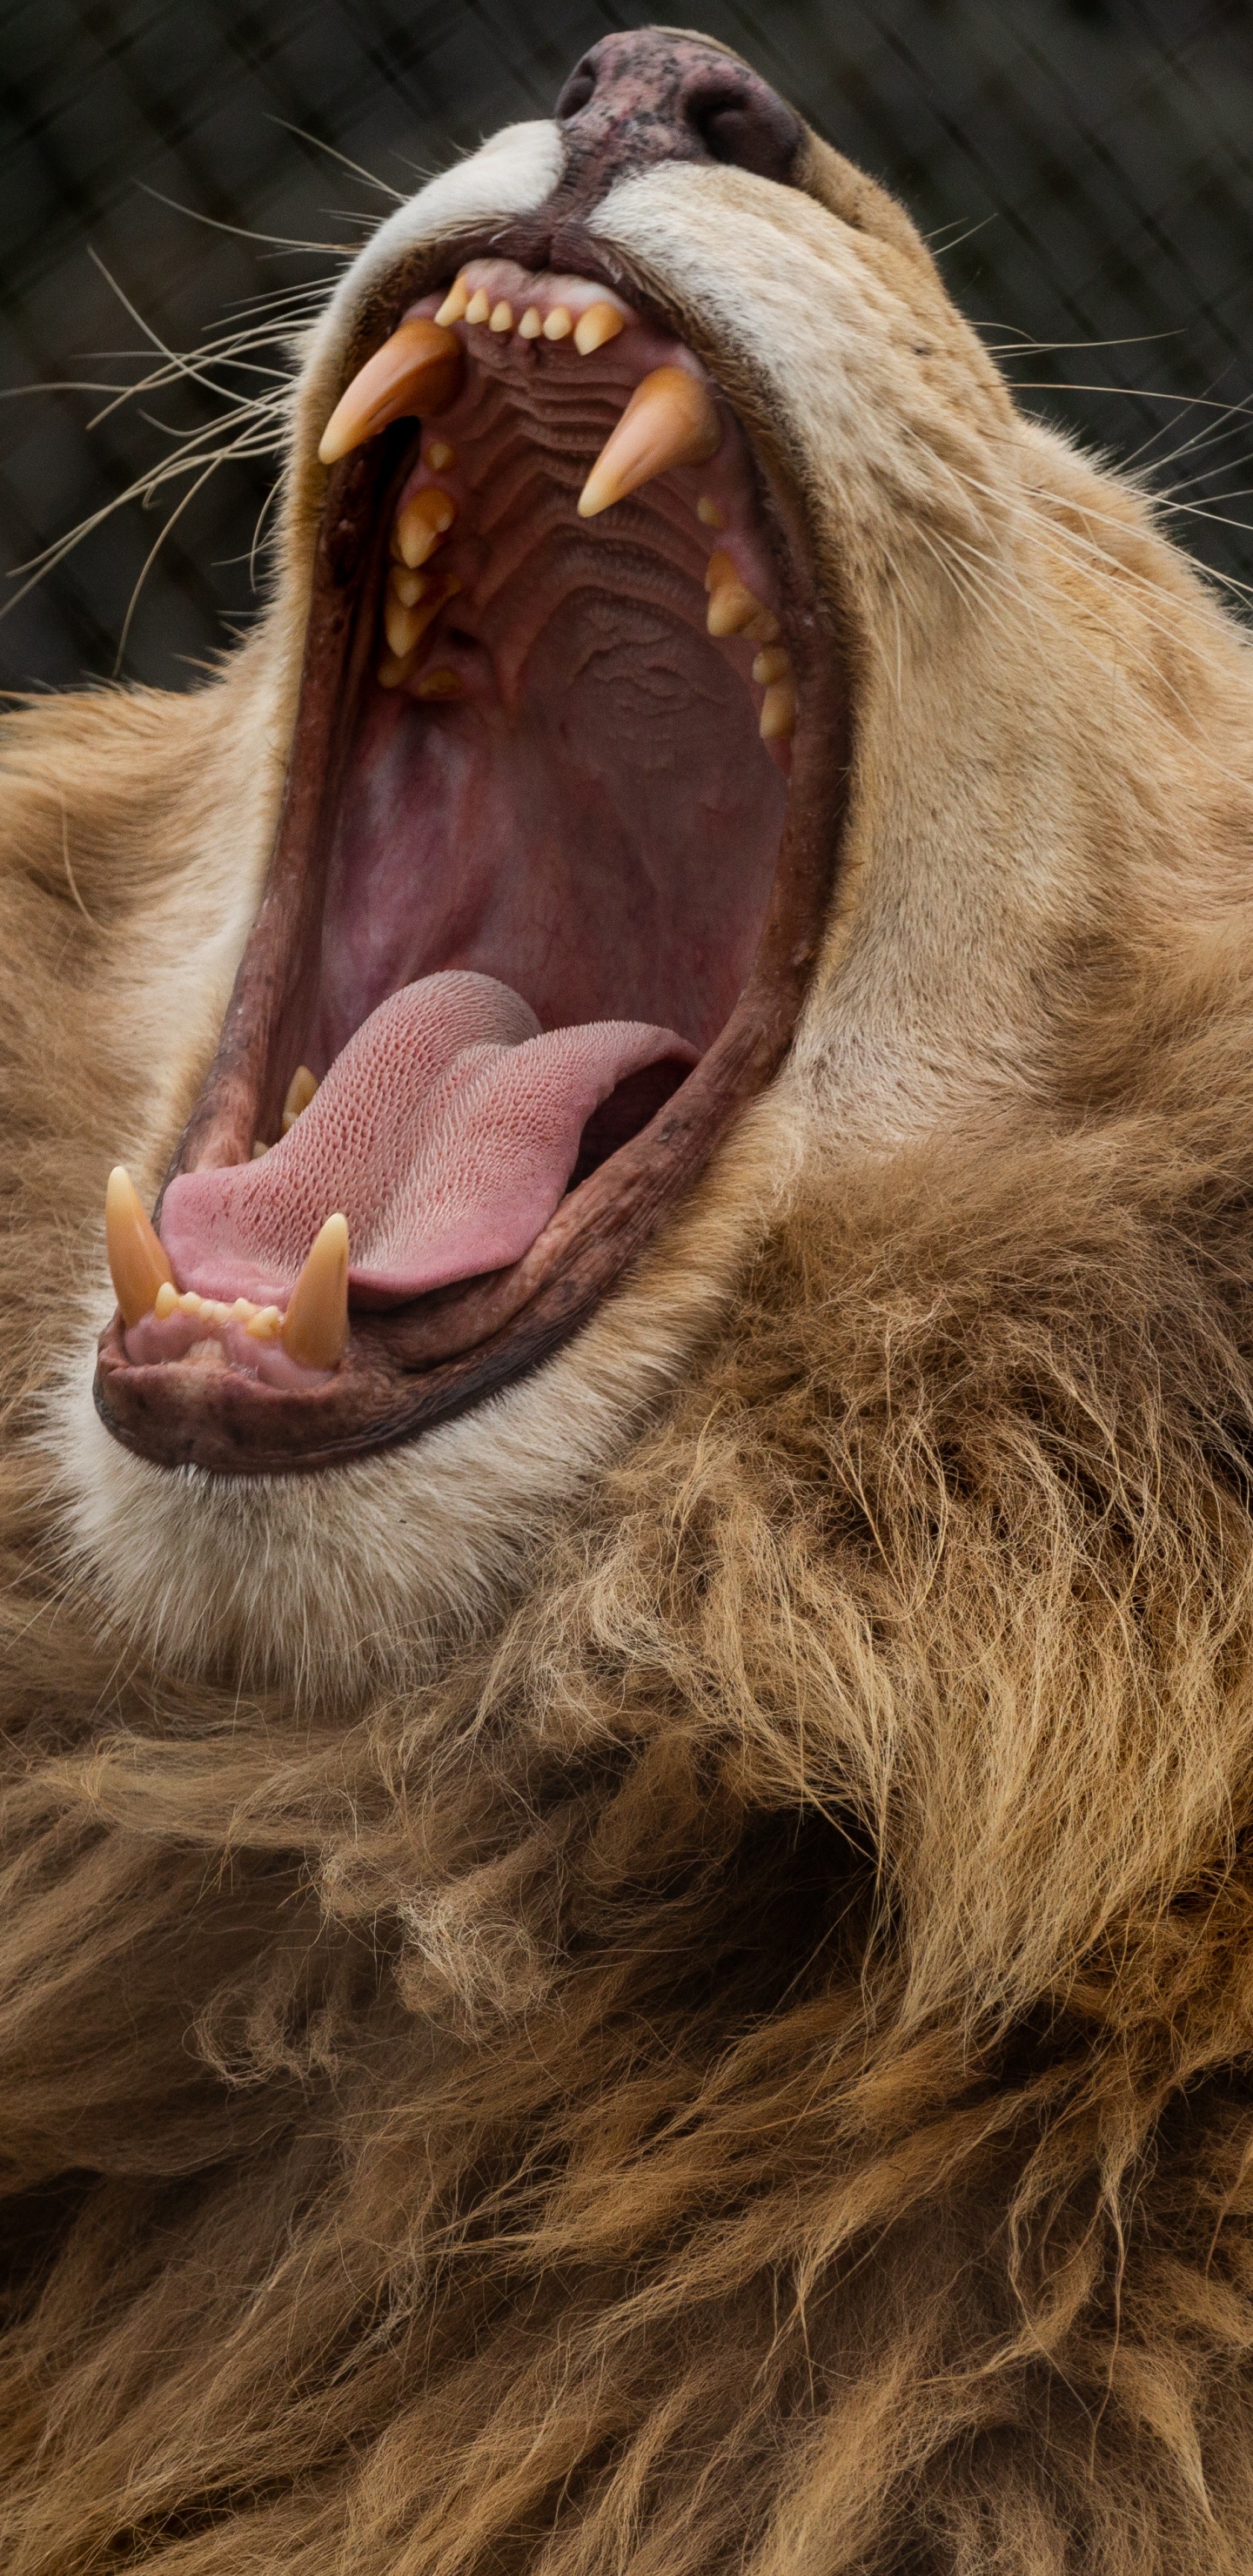 Brown Lion Showing Tongue During Daytime. Wallpaper in 1440x2960 Resolution